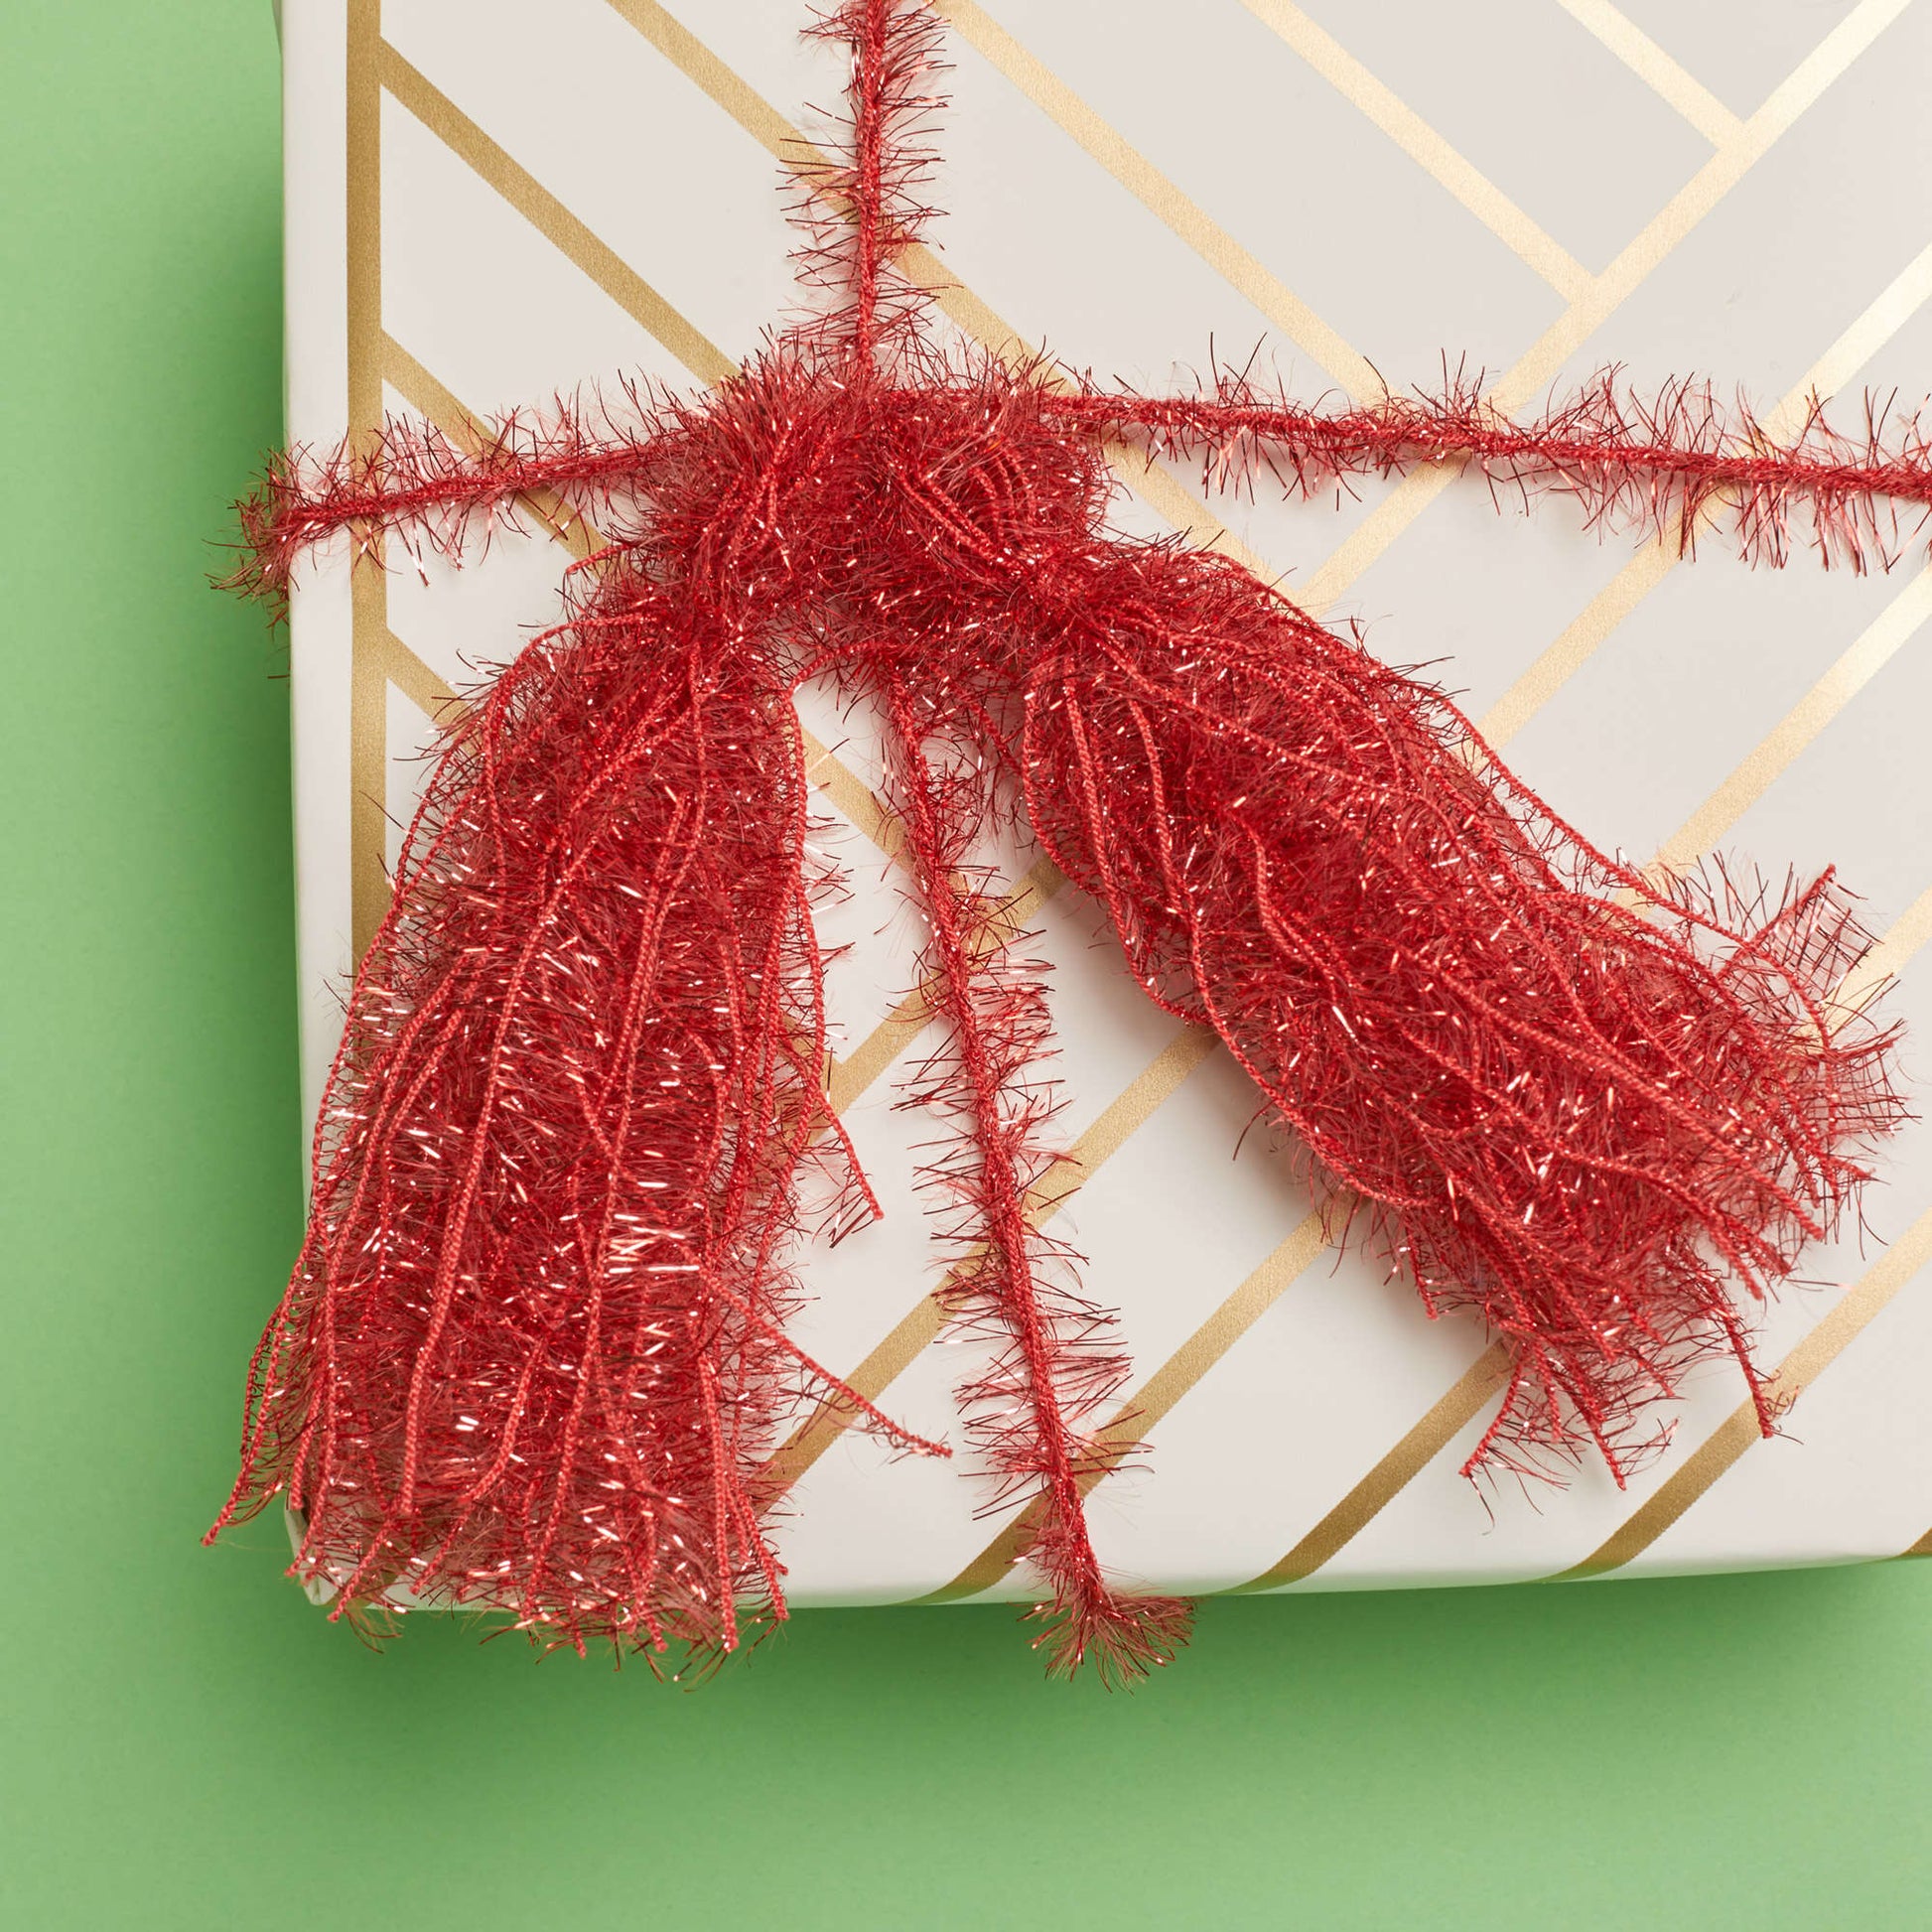 Free Red Heart Tassels And Poms Gift Toppers Craft Pattern